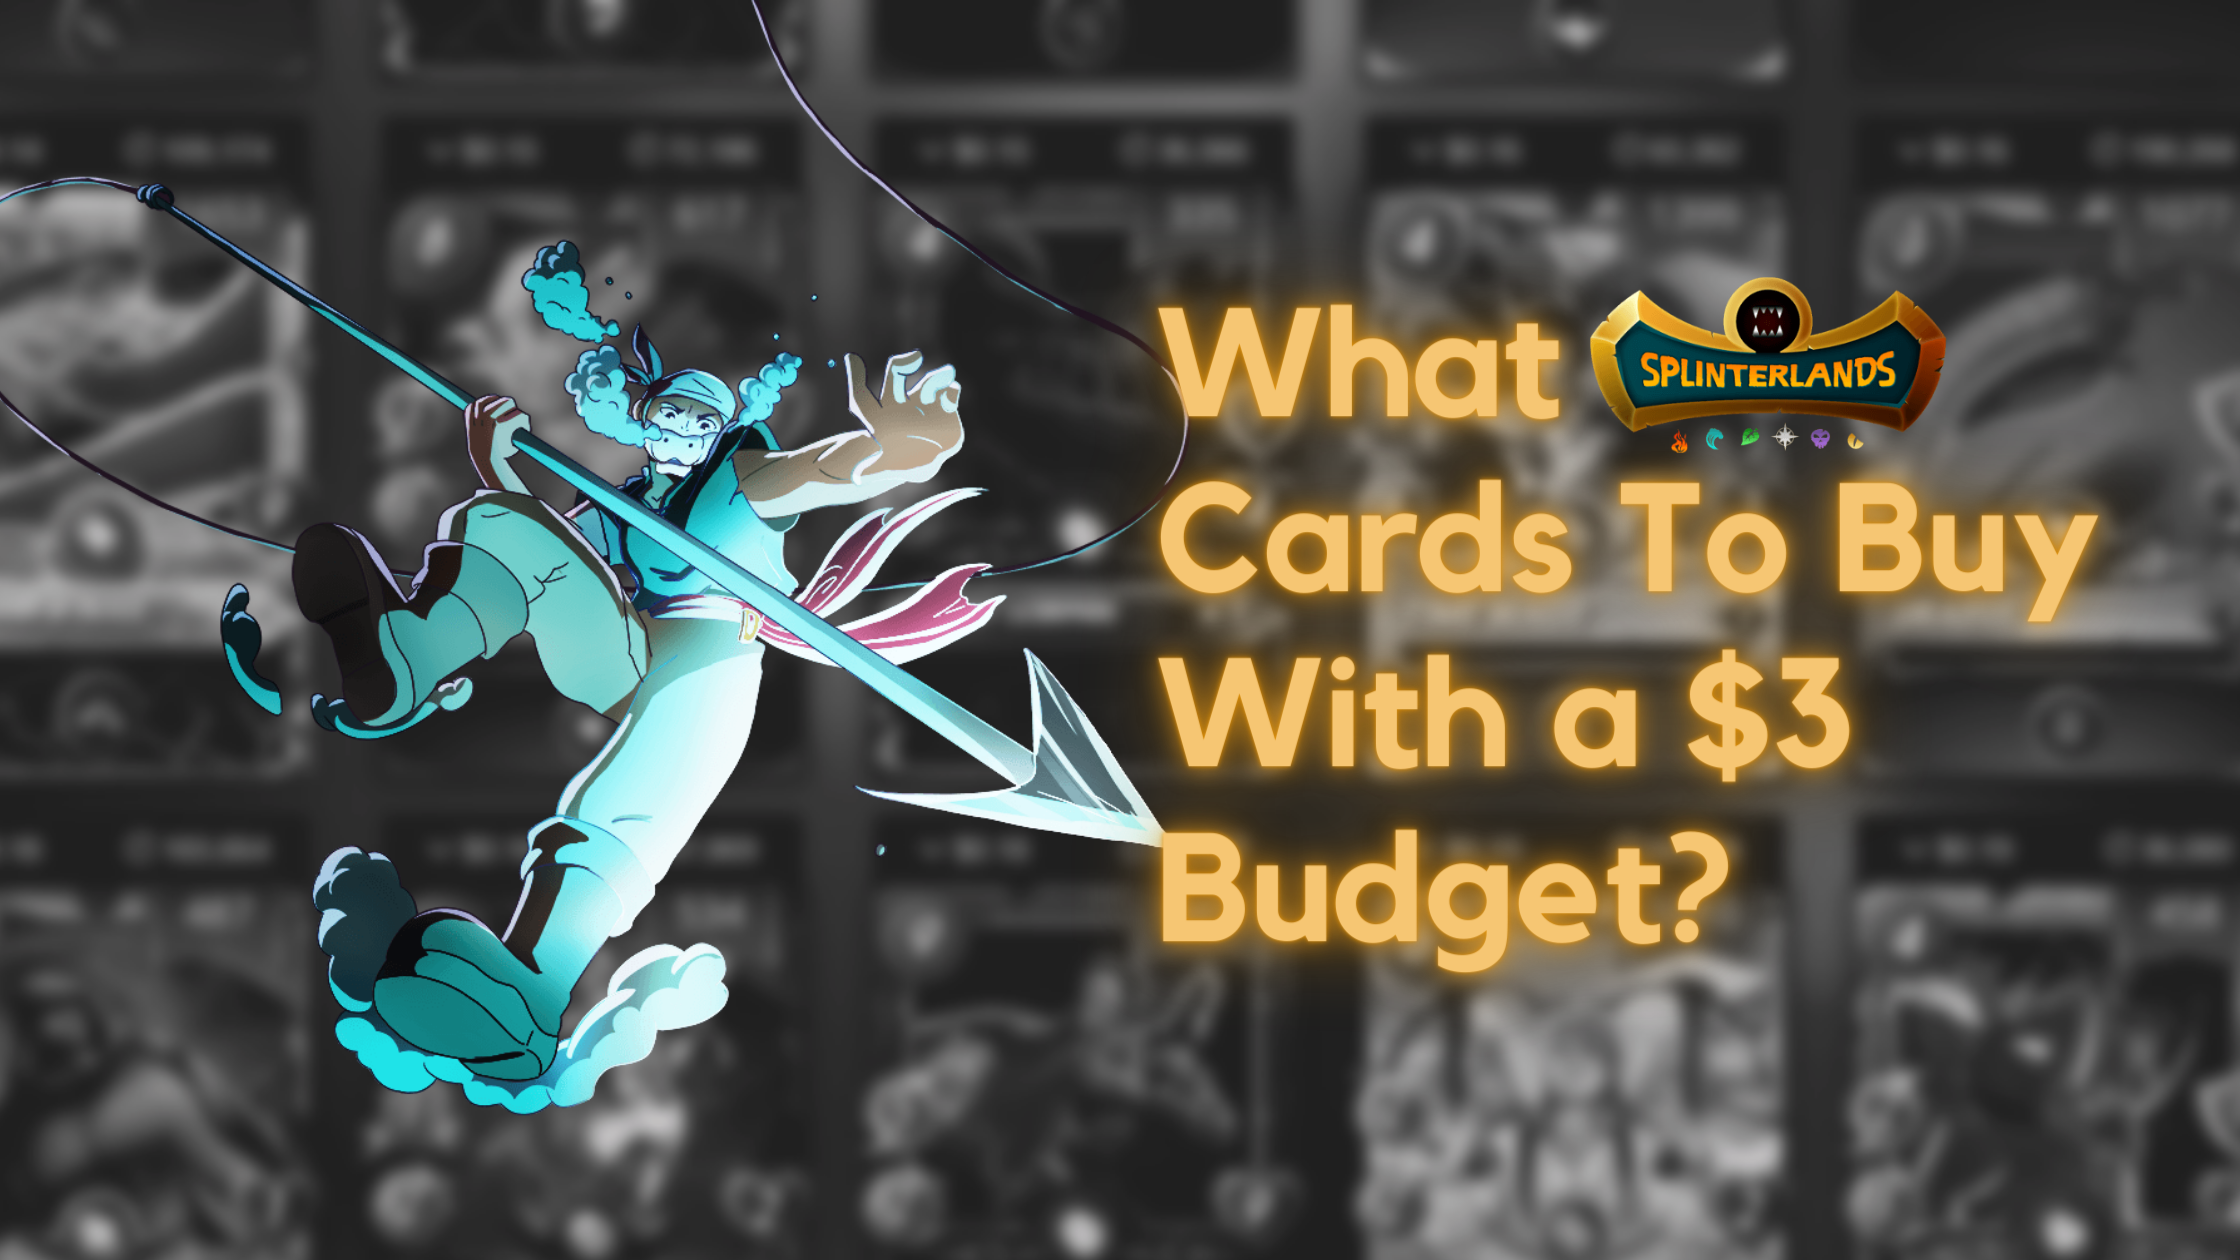 @brando28/what-splinterlands-cards-to-buy-with-a-usd3-budget